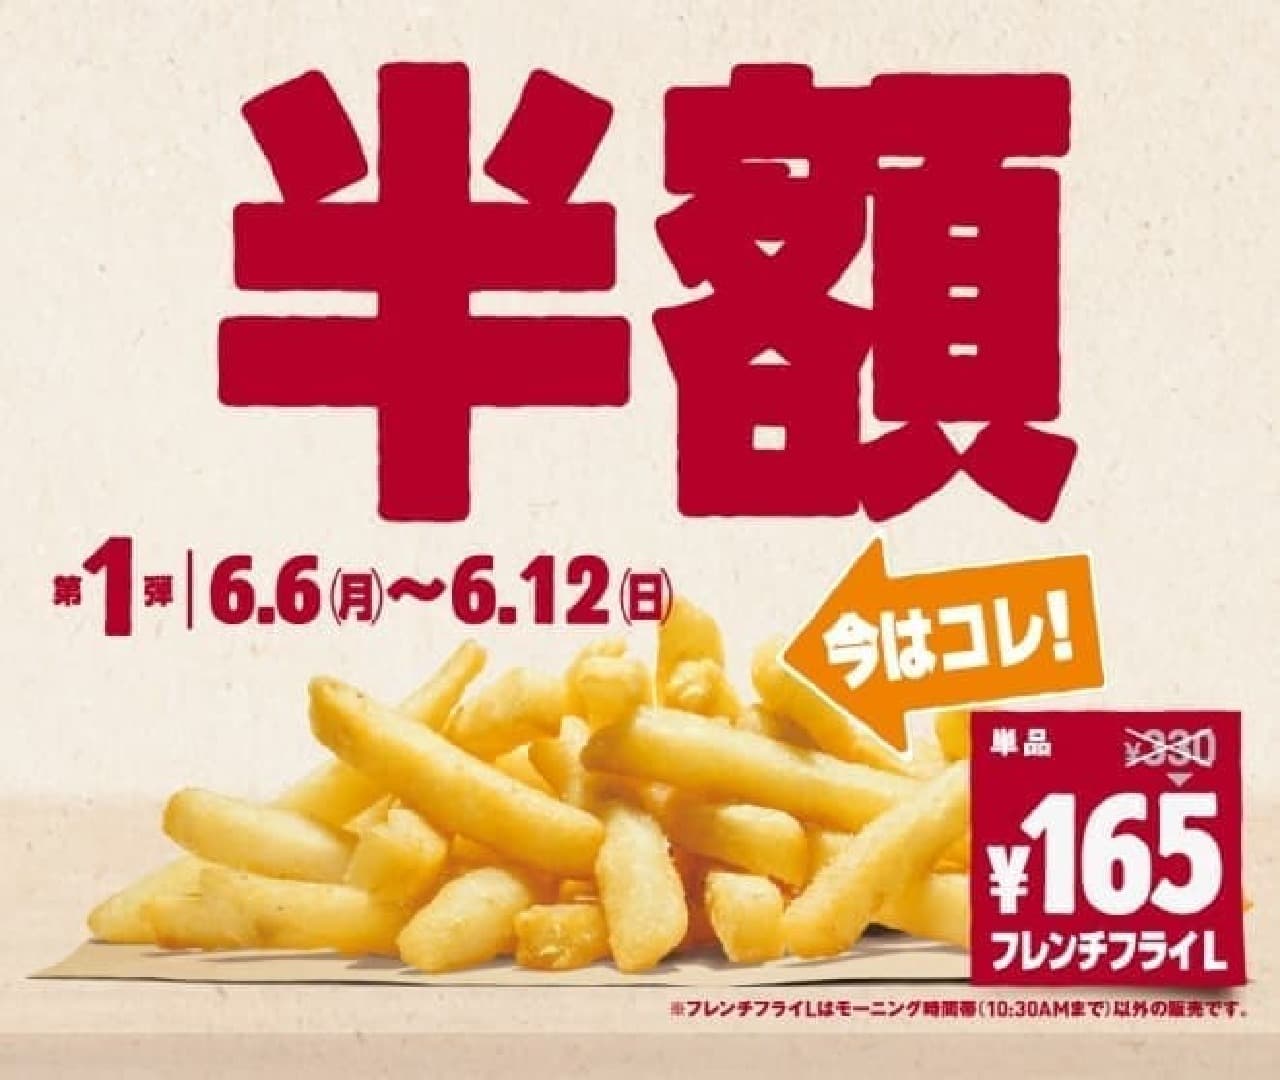 "Half Price Festa" where French fries are half price at Burger King